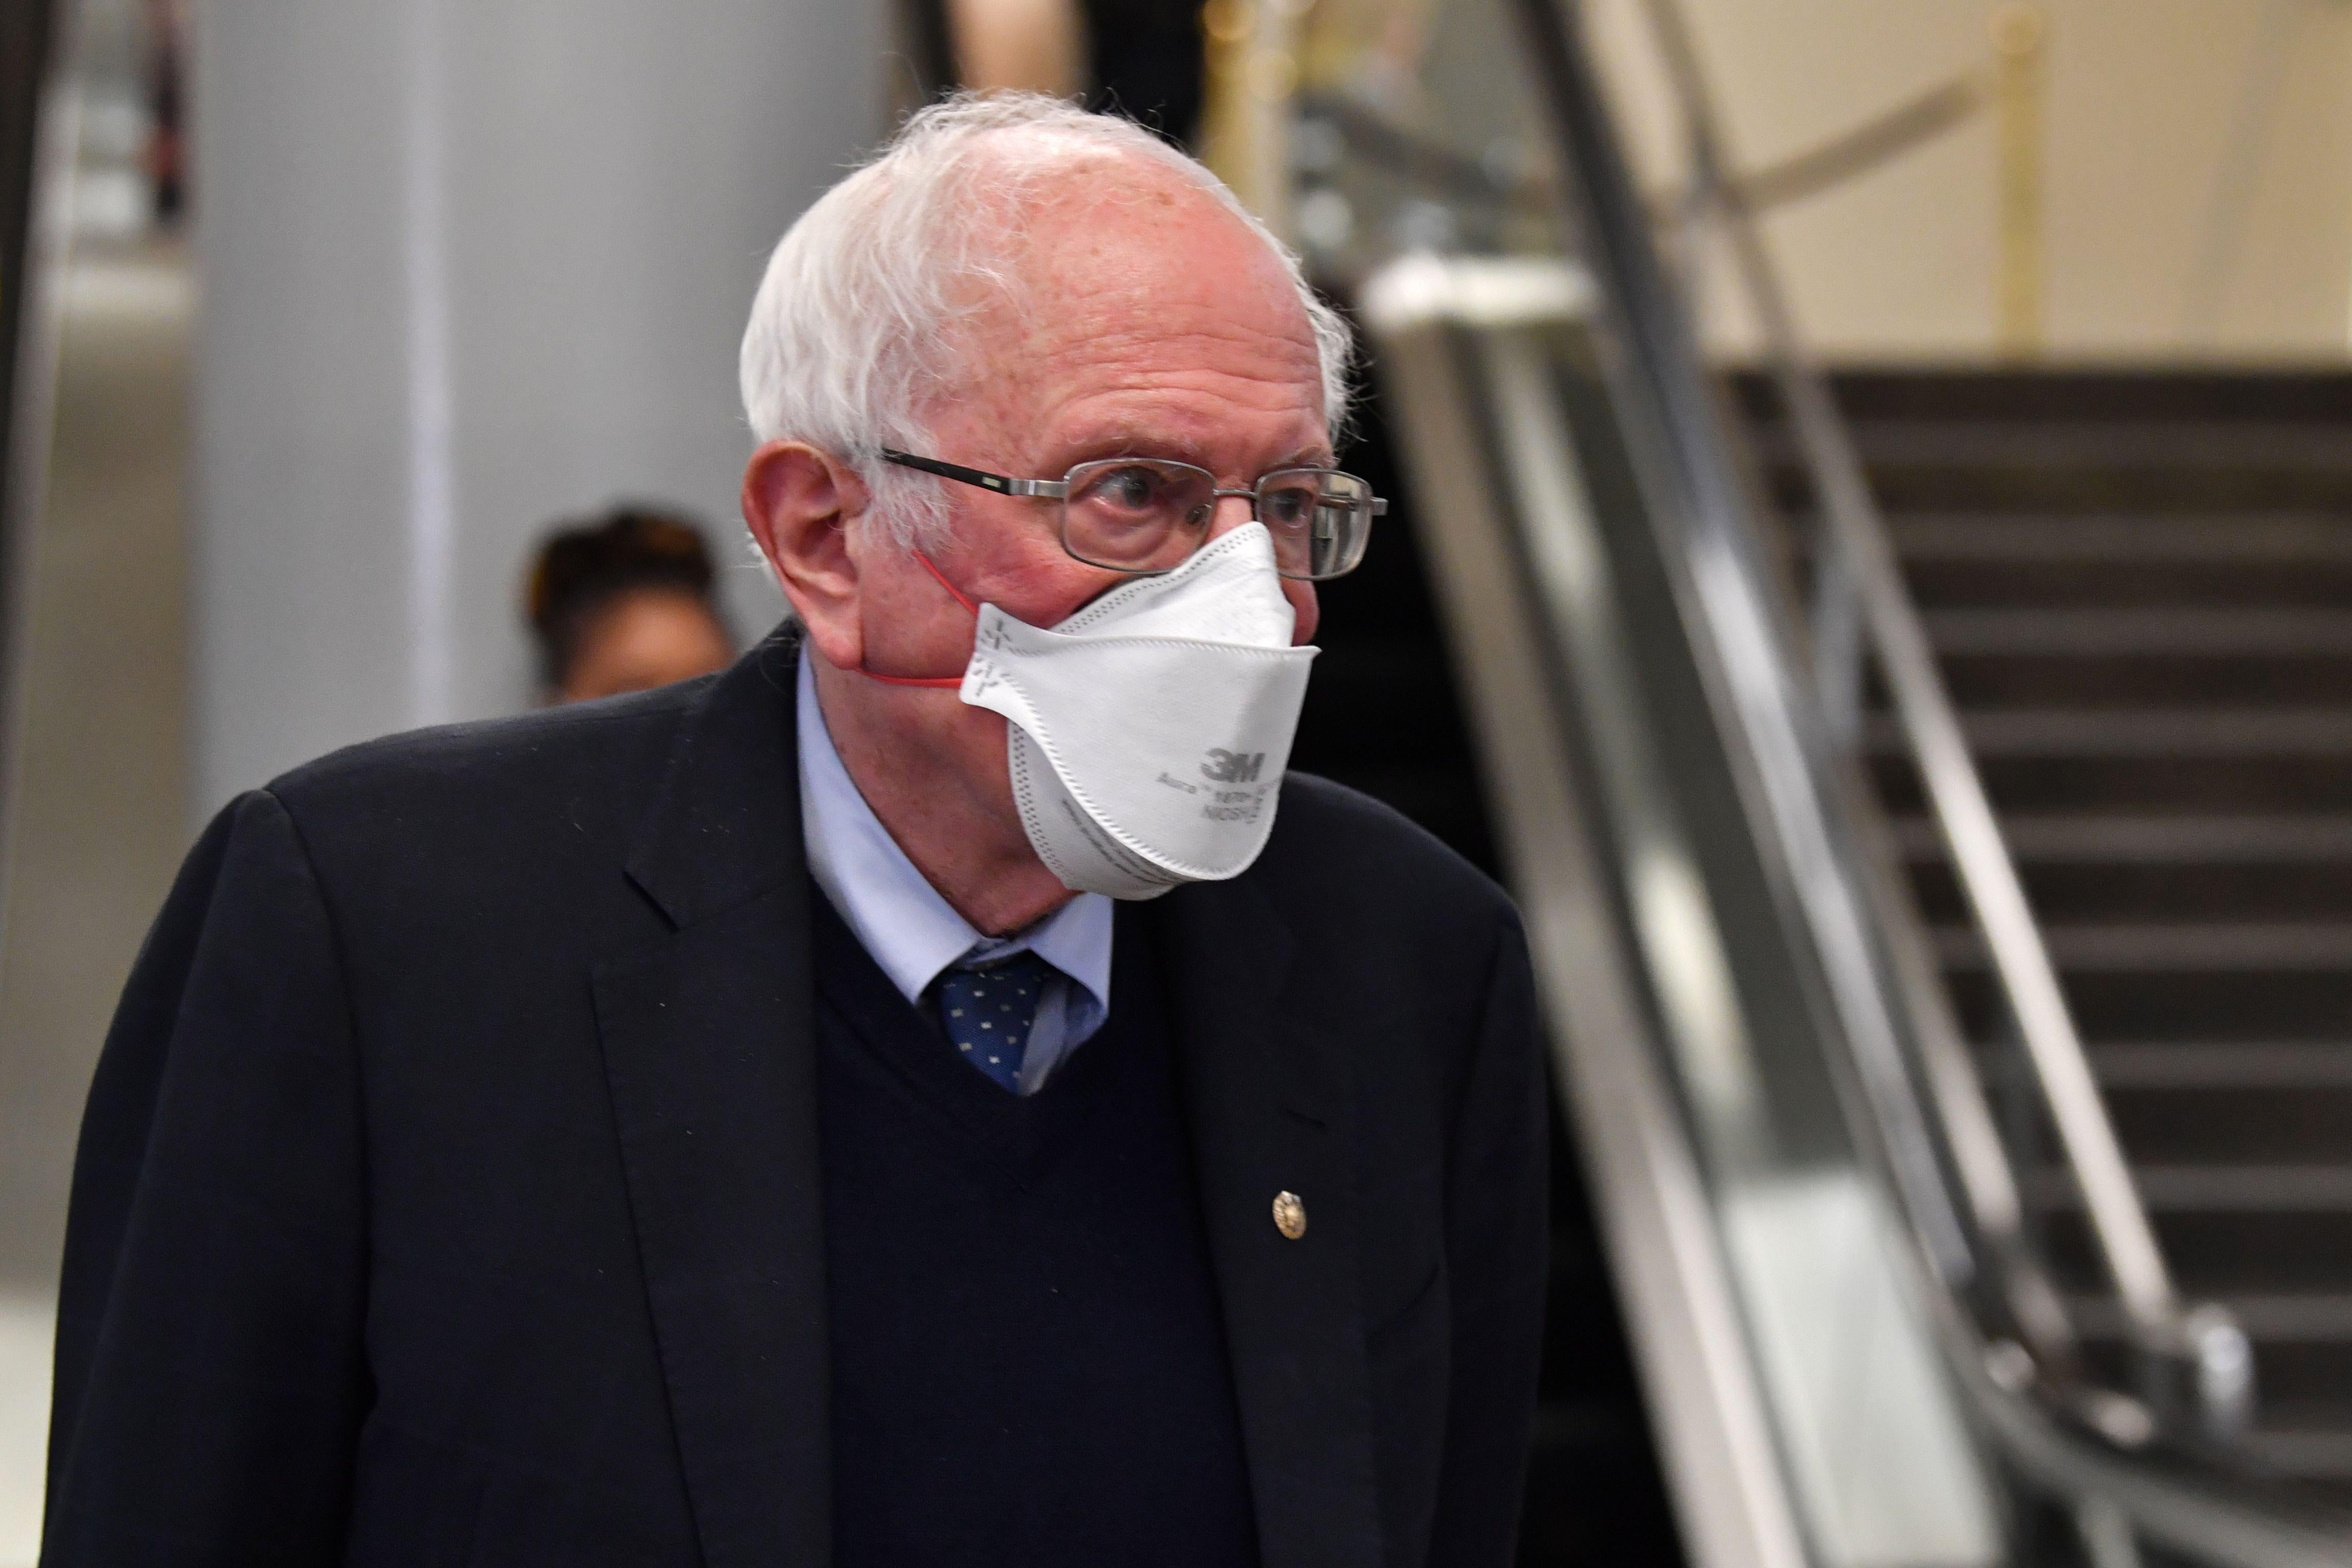 Sanders walks through the halls of Congress with a mask.